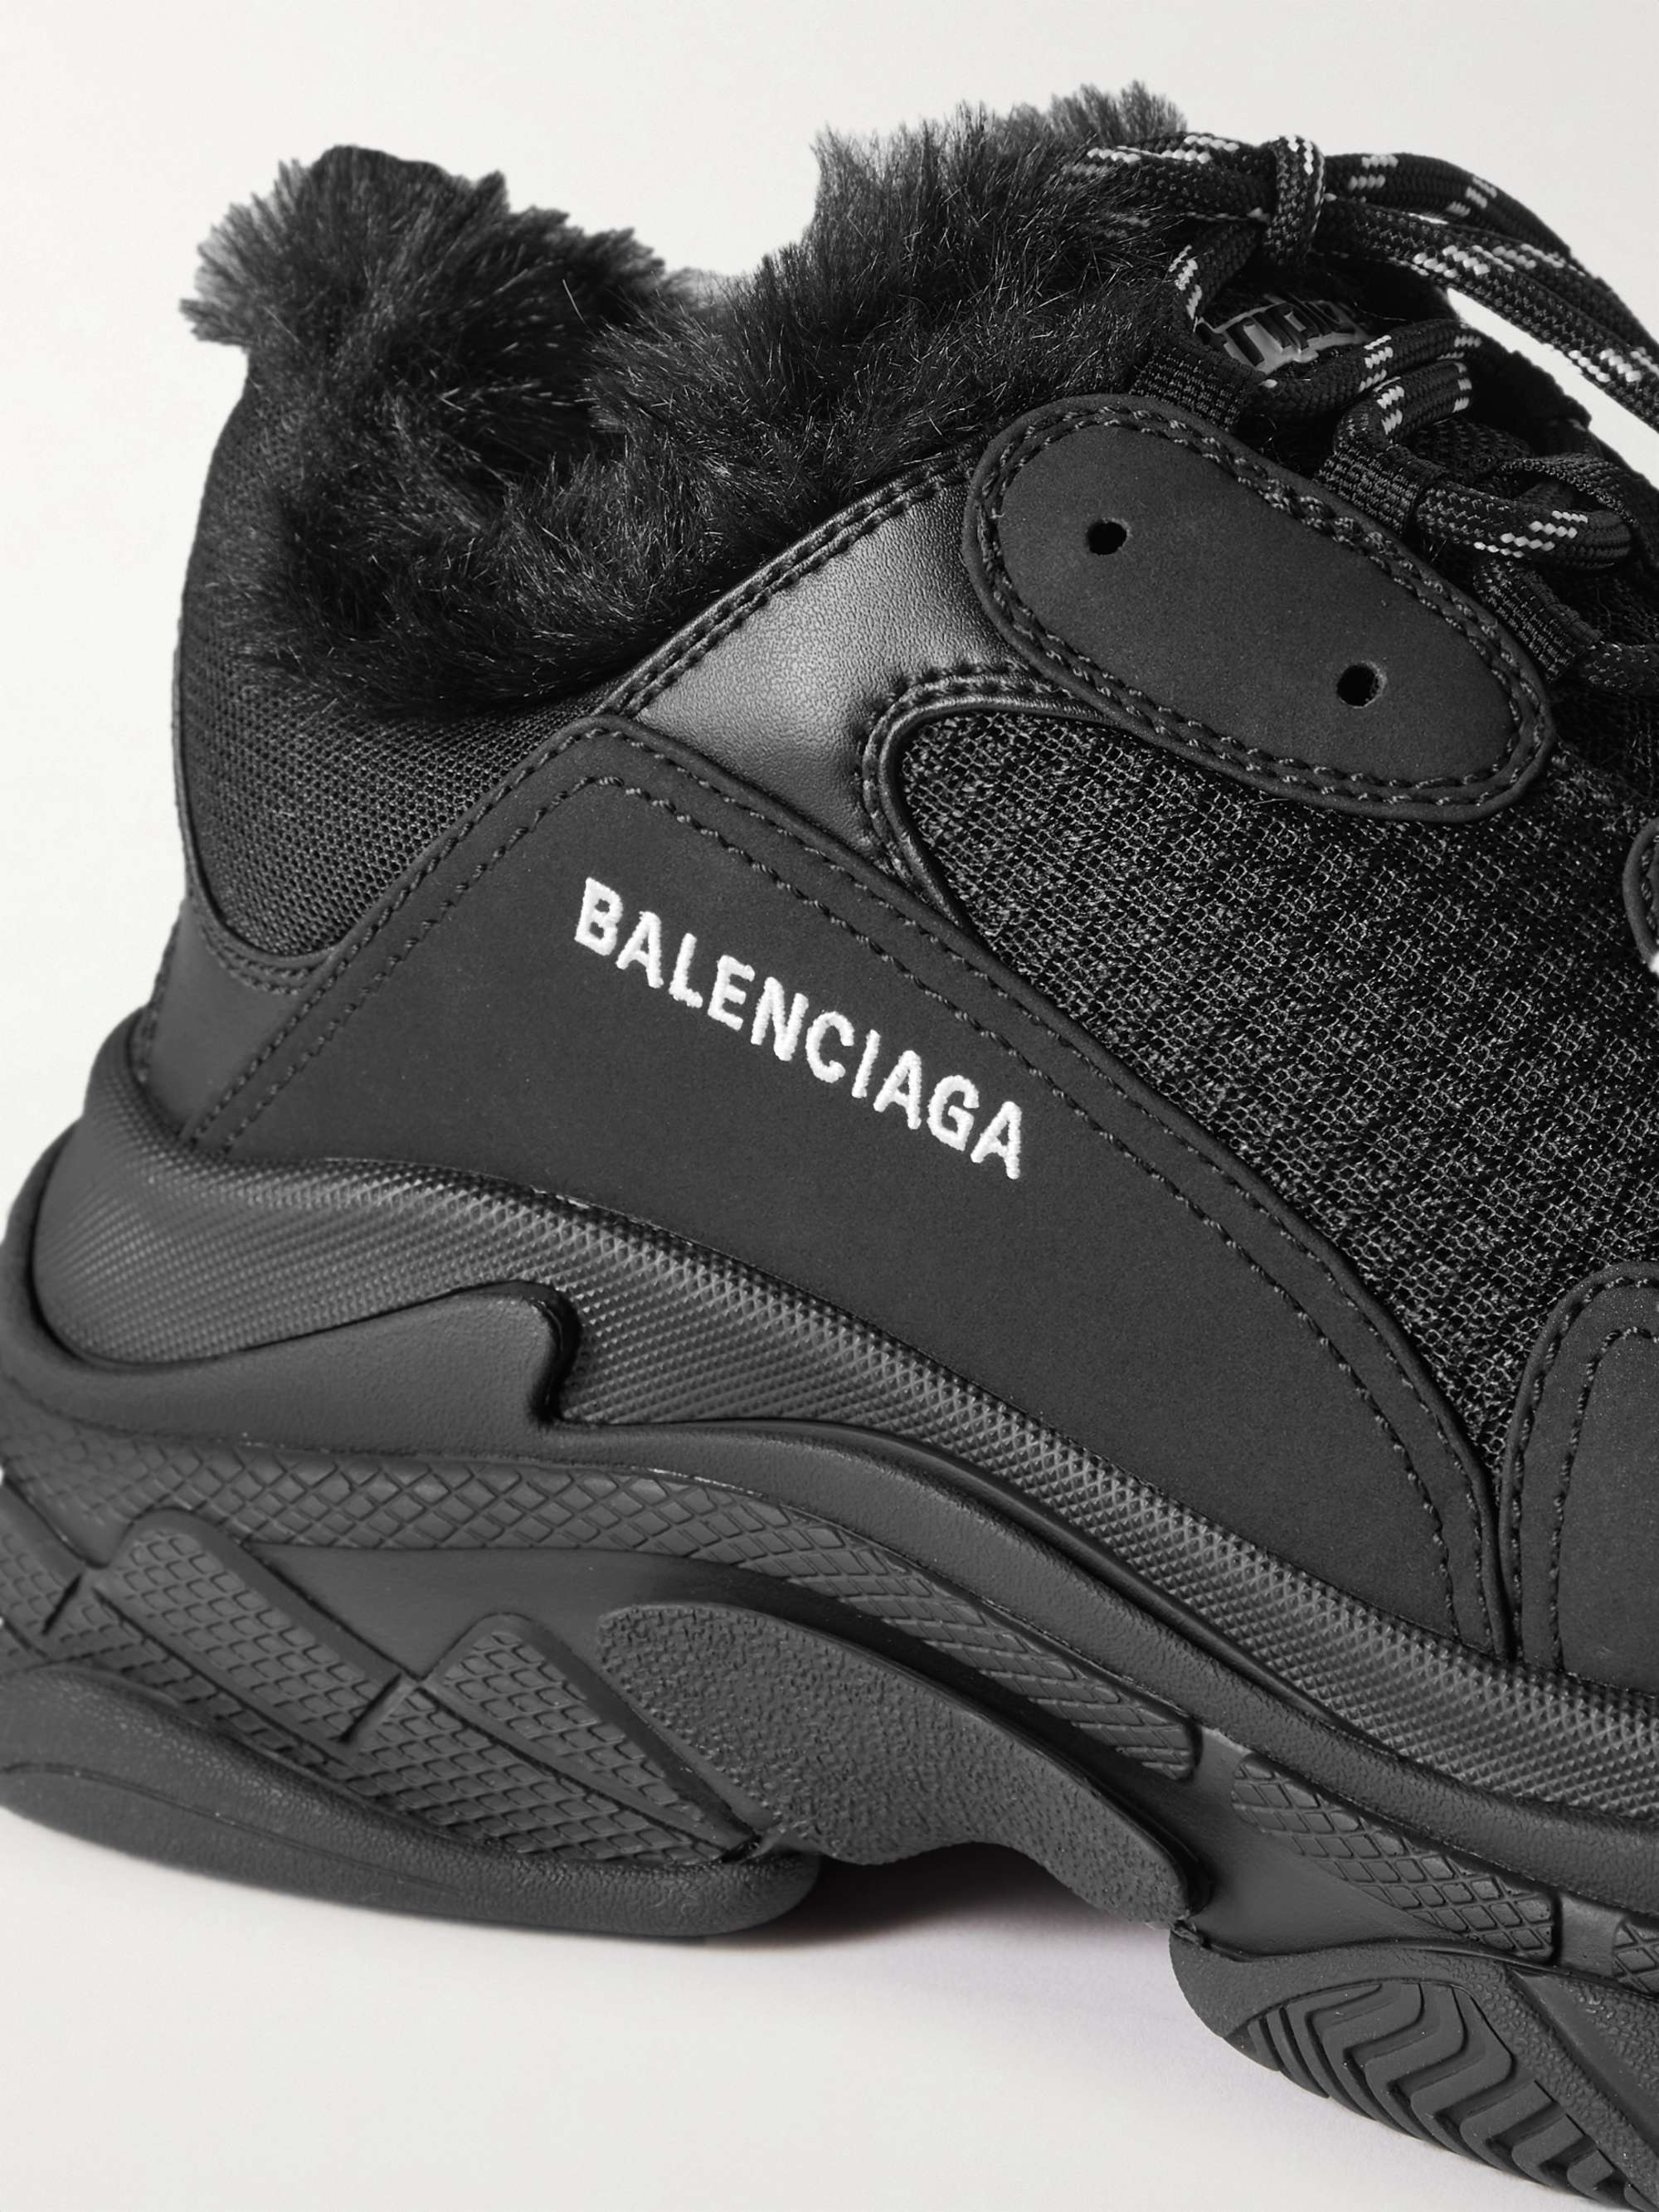 BALENCIAGA Triple S Faux Fur-Trimmed Mesh and Faux Leather Sneakers